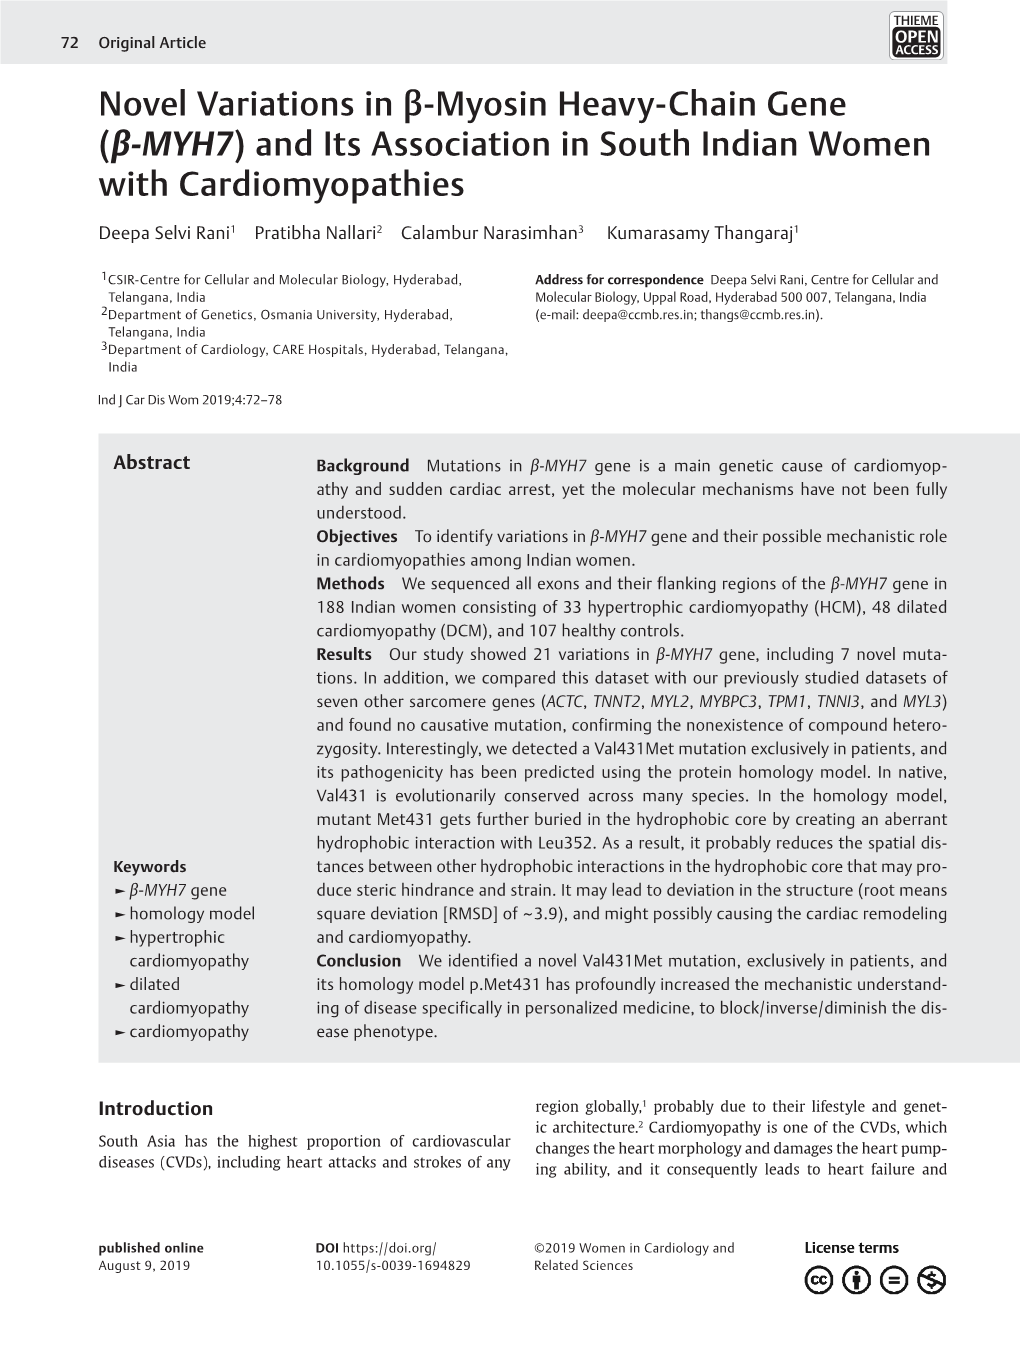 Novel Variations in Β-Myosin Heavy-Chain Gene (Β-MYH7) and Its Association in South Indian Women with Cardiomyopathies